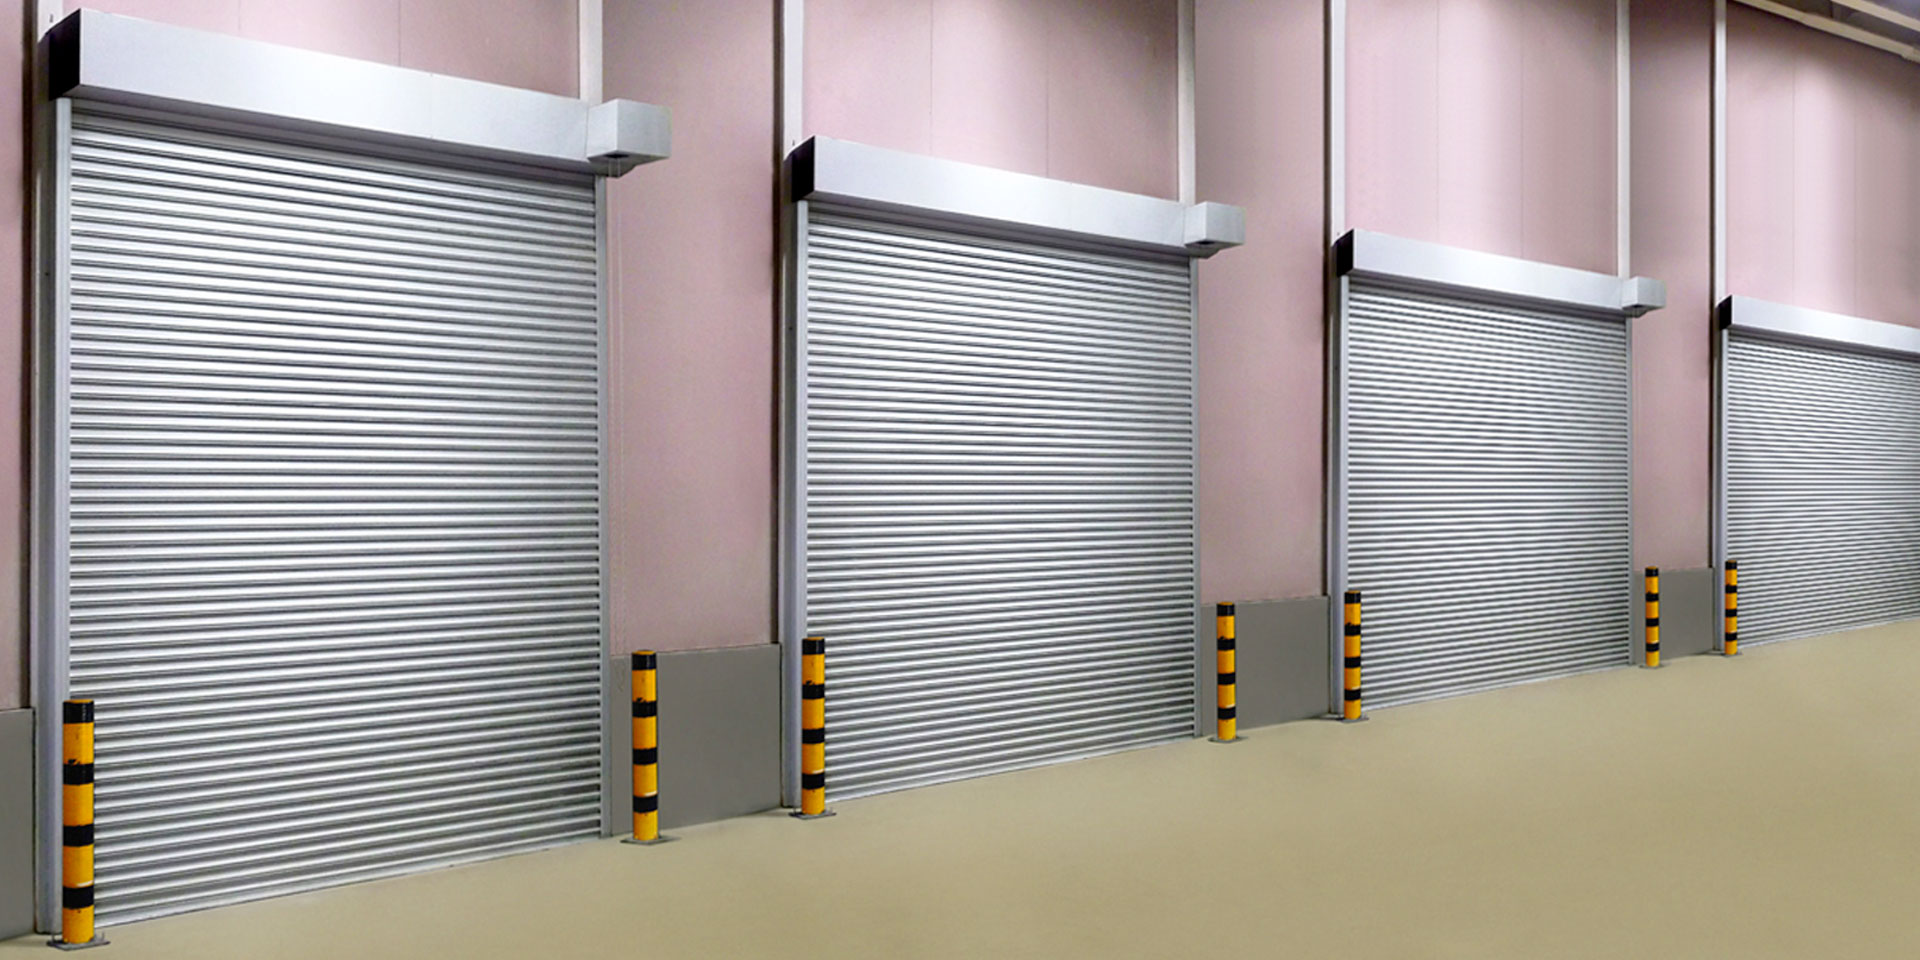 What’s the difference between fire shutters and fire curtains?